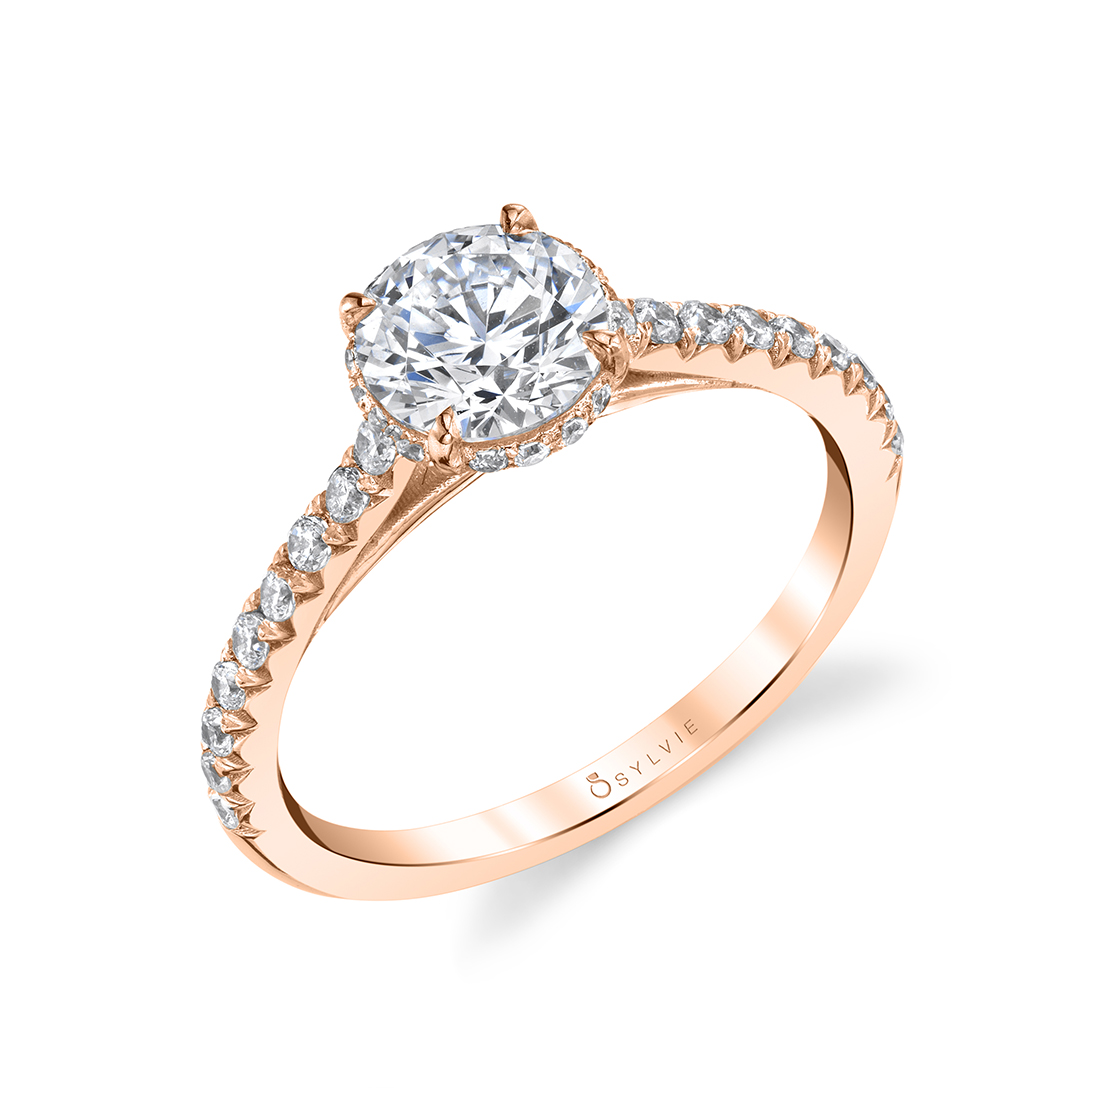 Hidden Halo Engagement Ring in Rose Gold - Harmonie